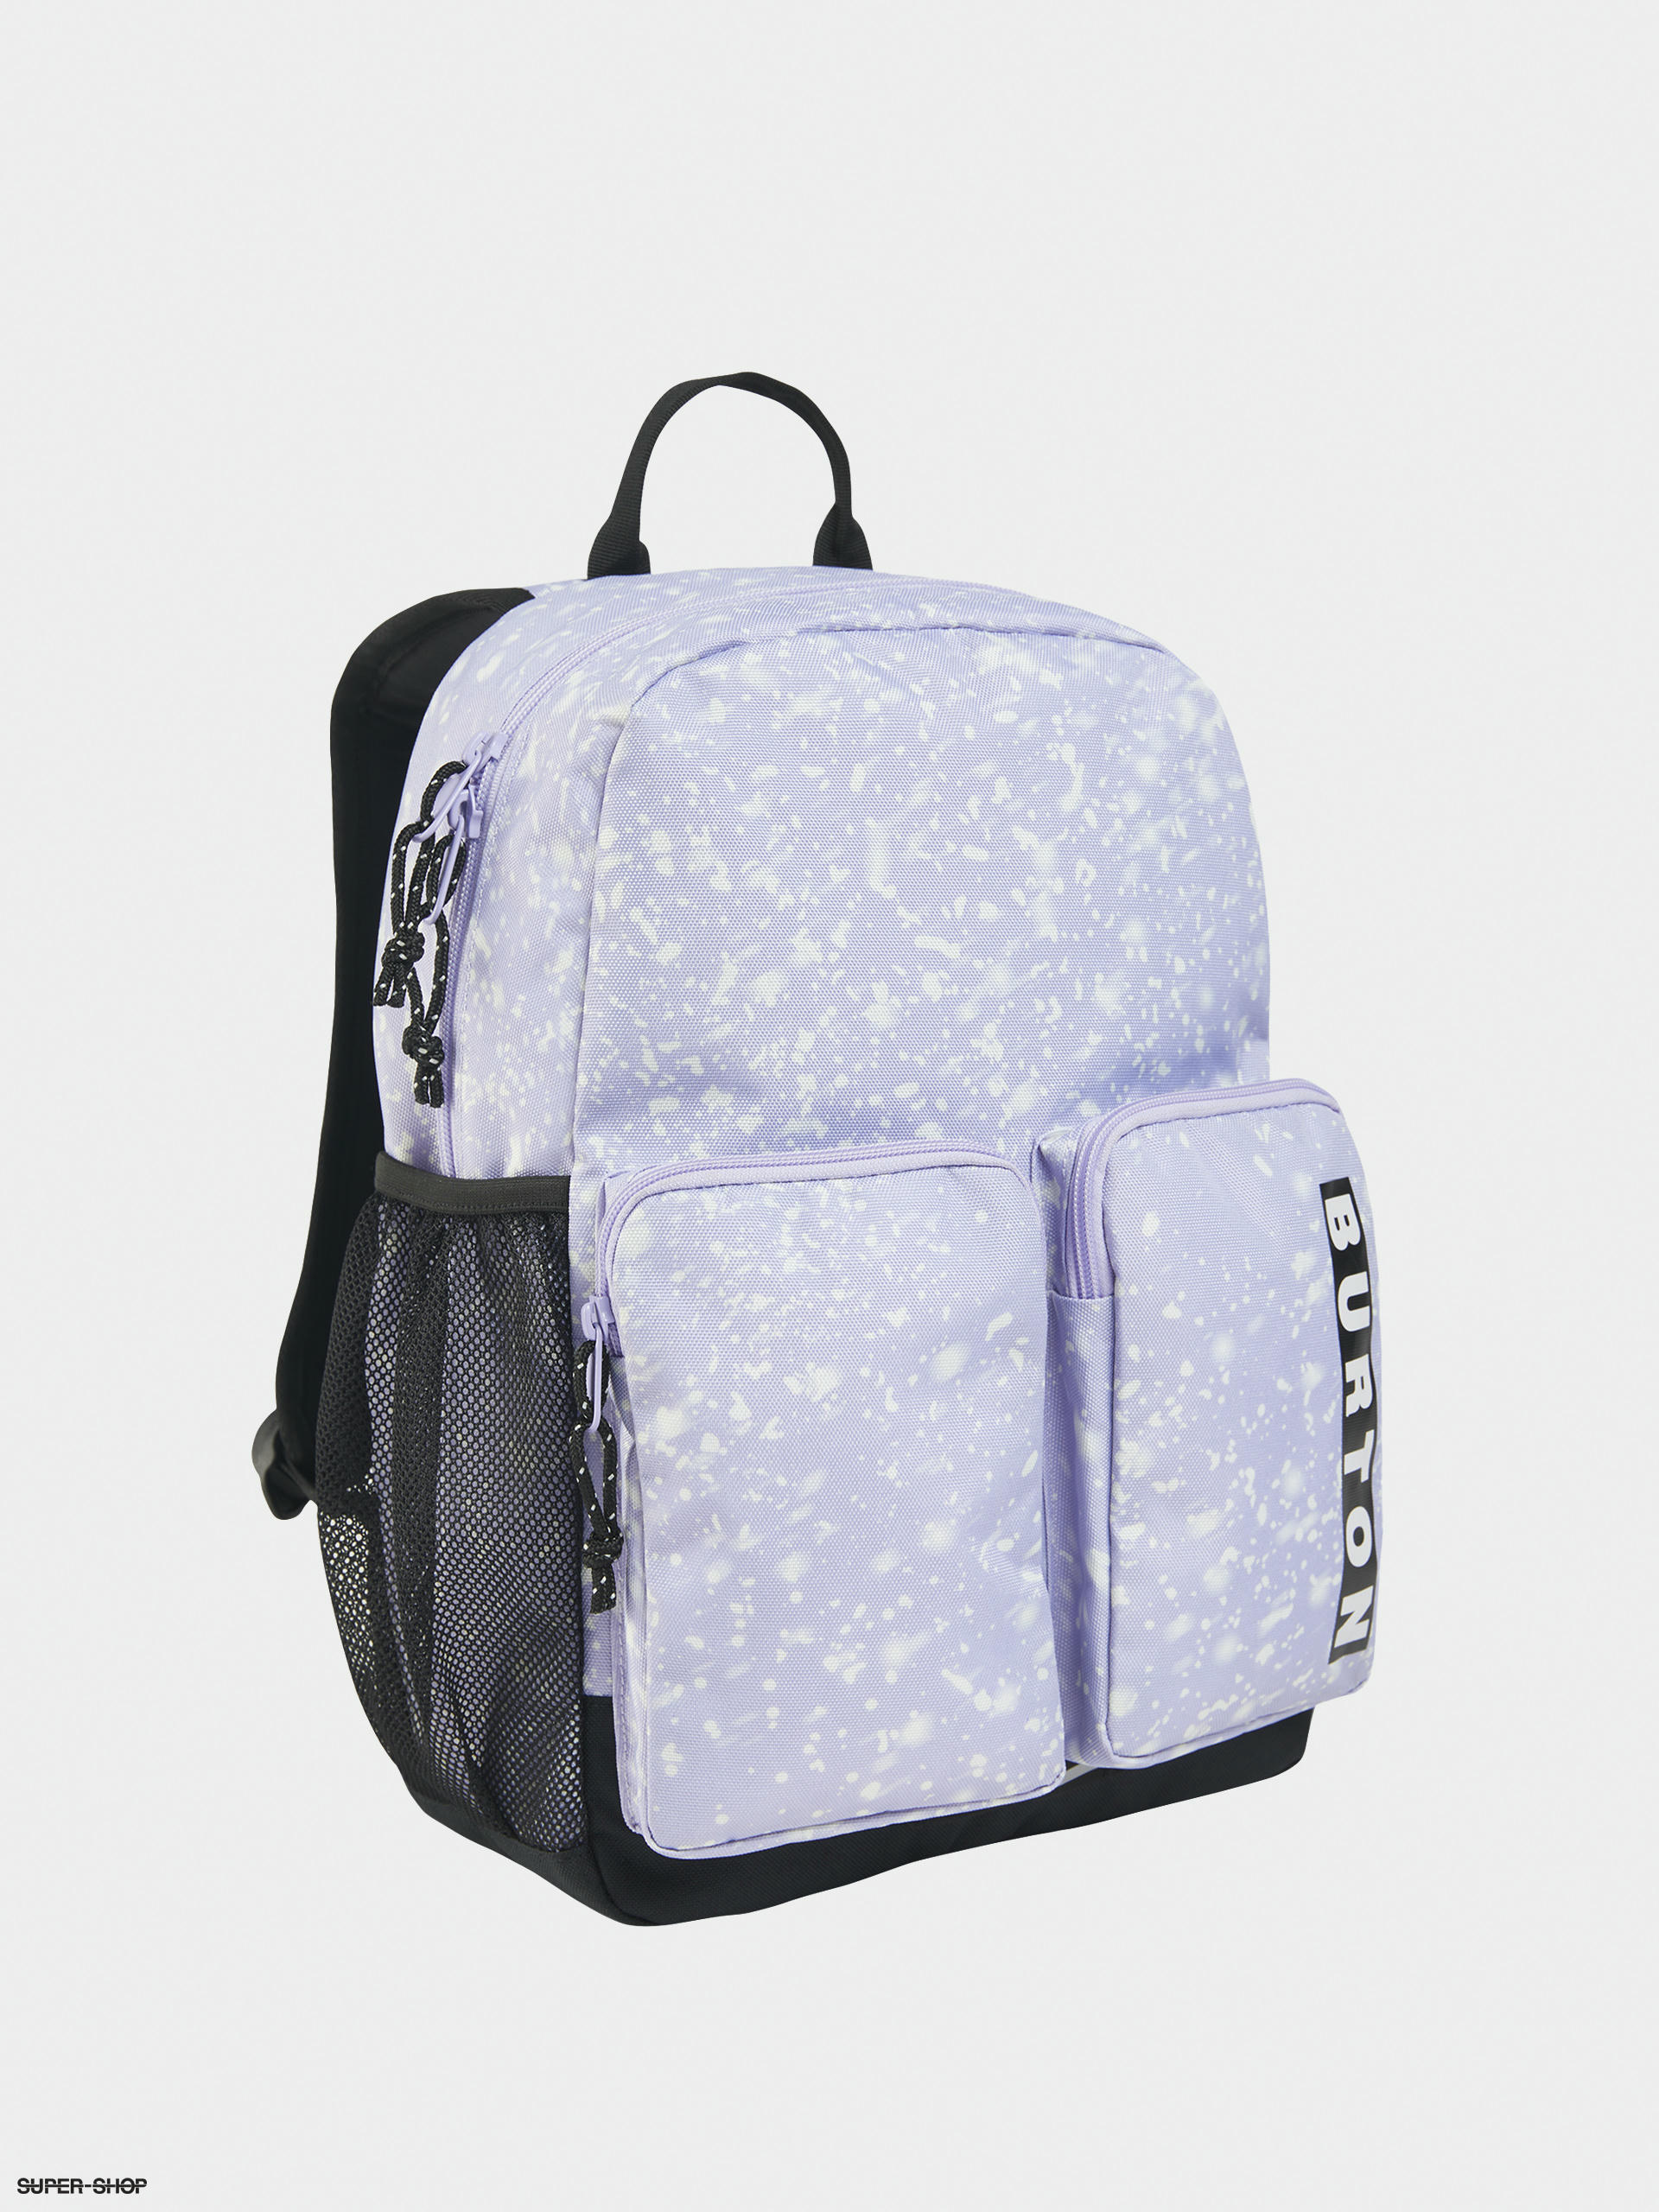 abshoo Heavy Duty Clear Backpack School Approved